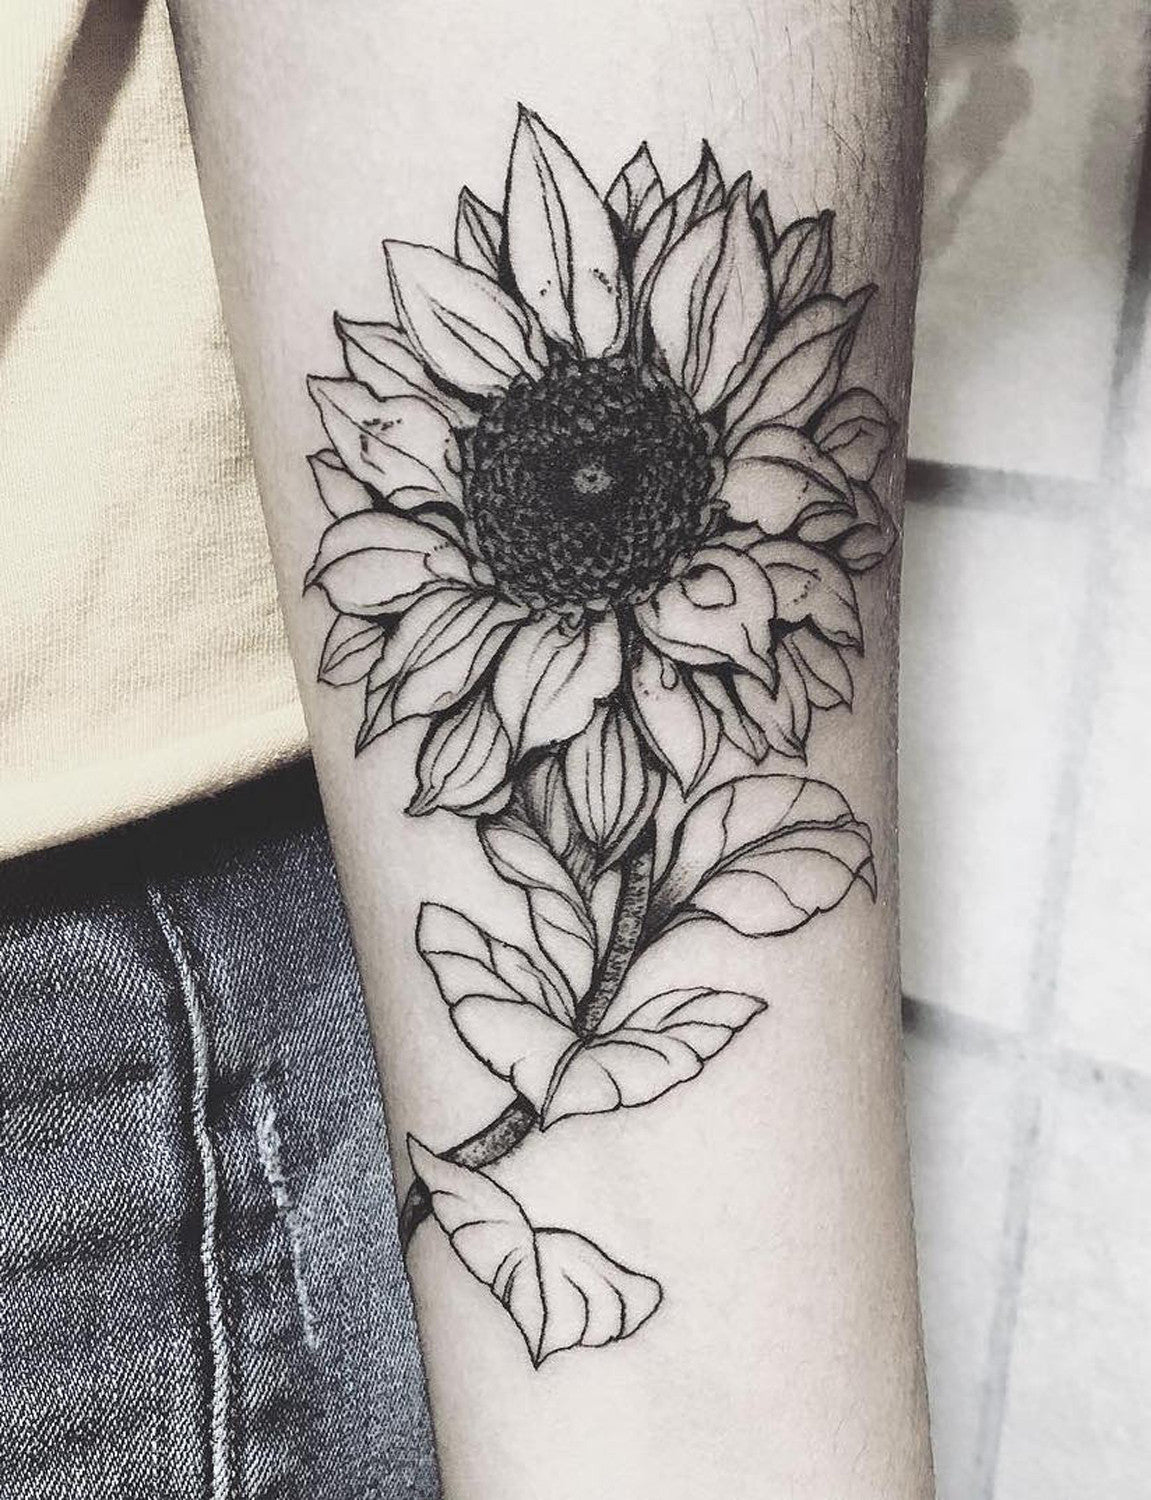 Full Black and White Realistic Vintage Floral Sunflower Wrist Arm Tattoo Ideas at MyBodiArt.com